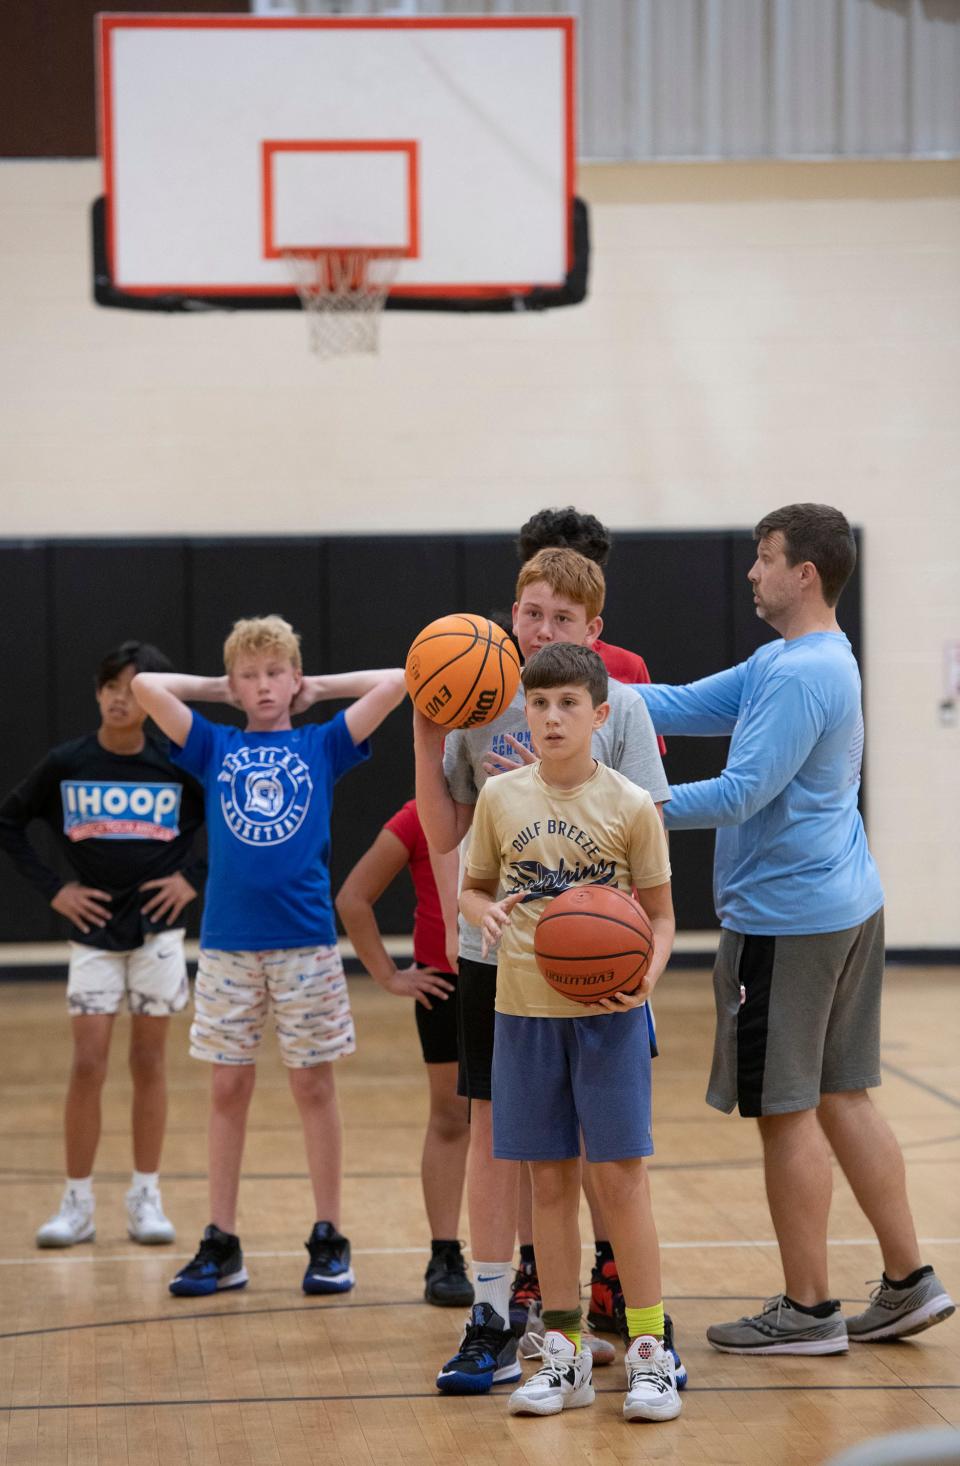 Reid Clark hones his basketball skills at a clinic for middle school students at the Wedgewood Community Center on Sept. 14. Clark is among the students from Santa Rosa County who travel to Escambia County to participate in youth sports.